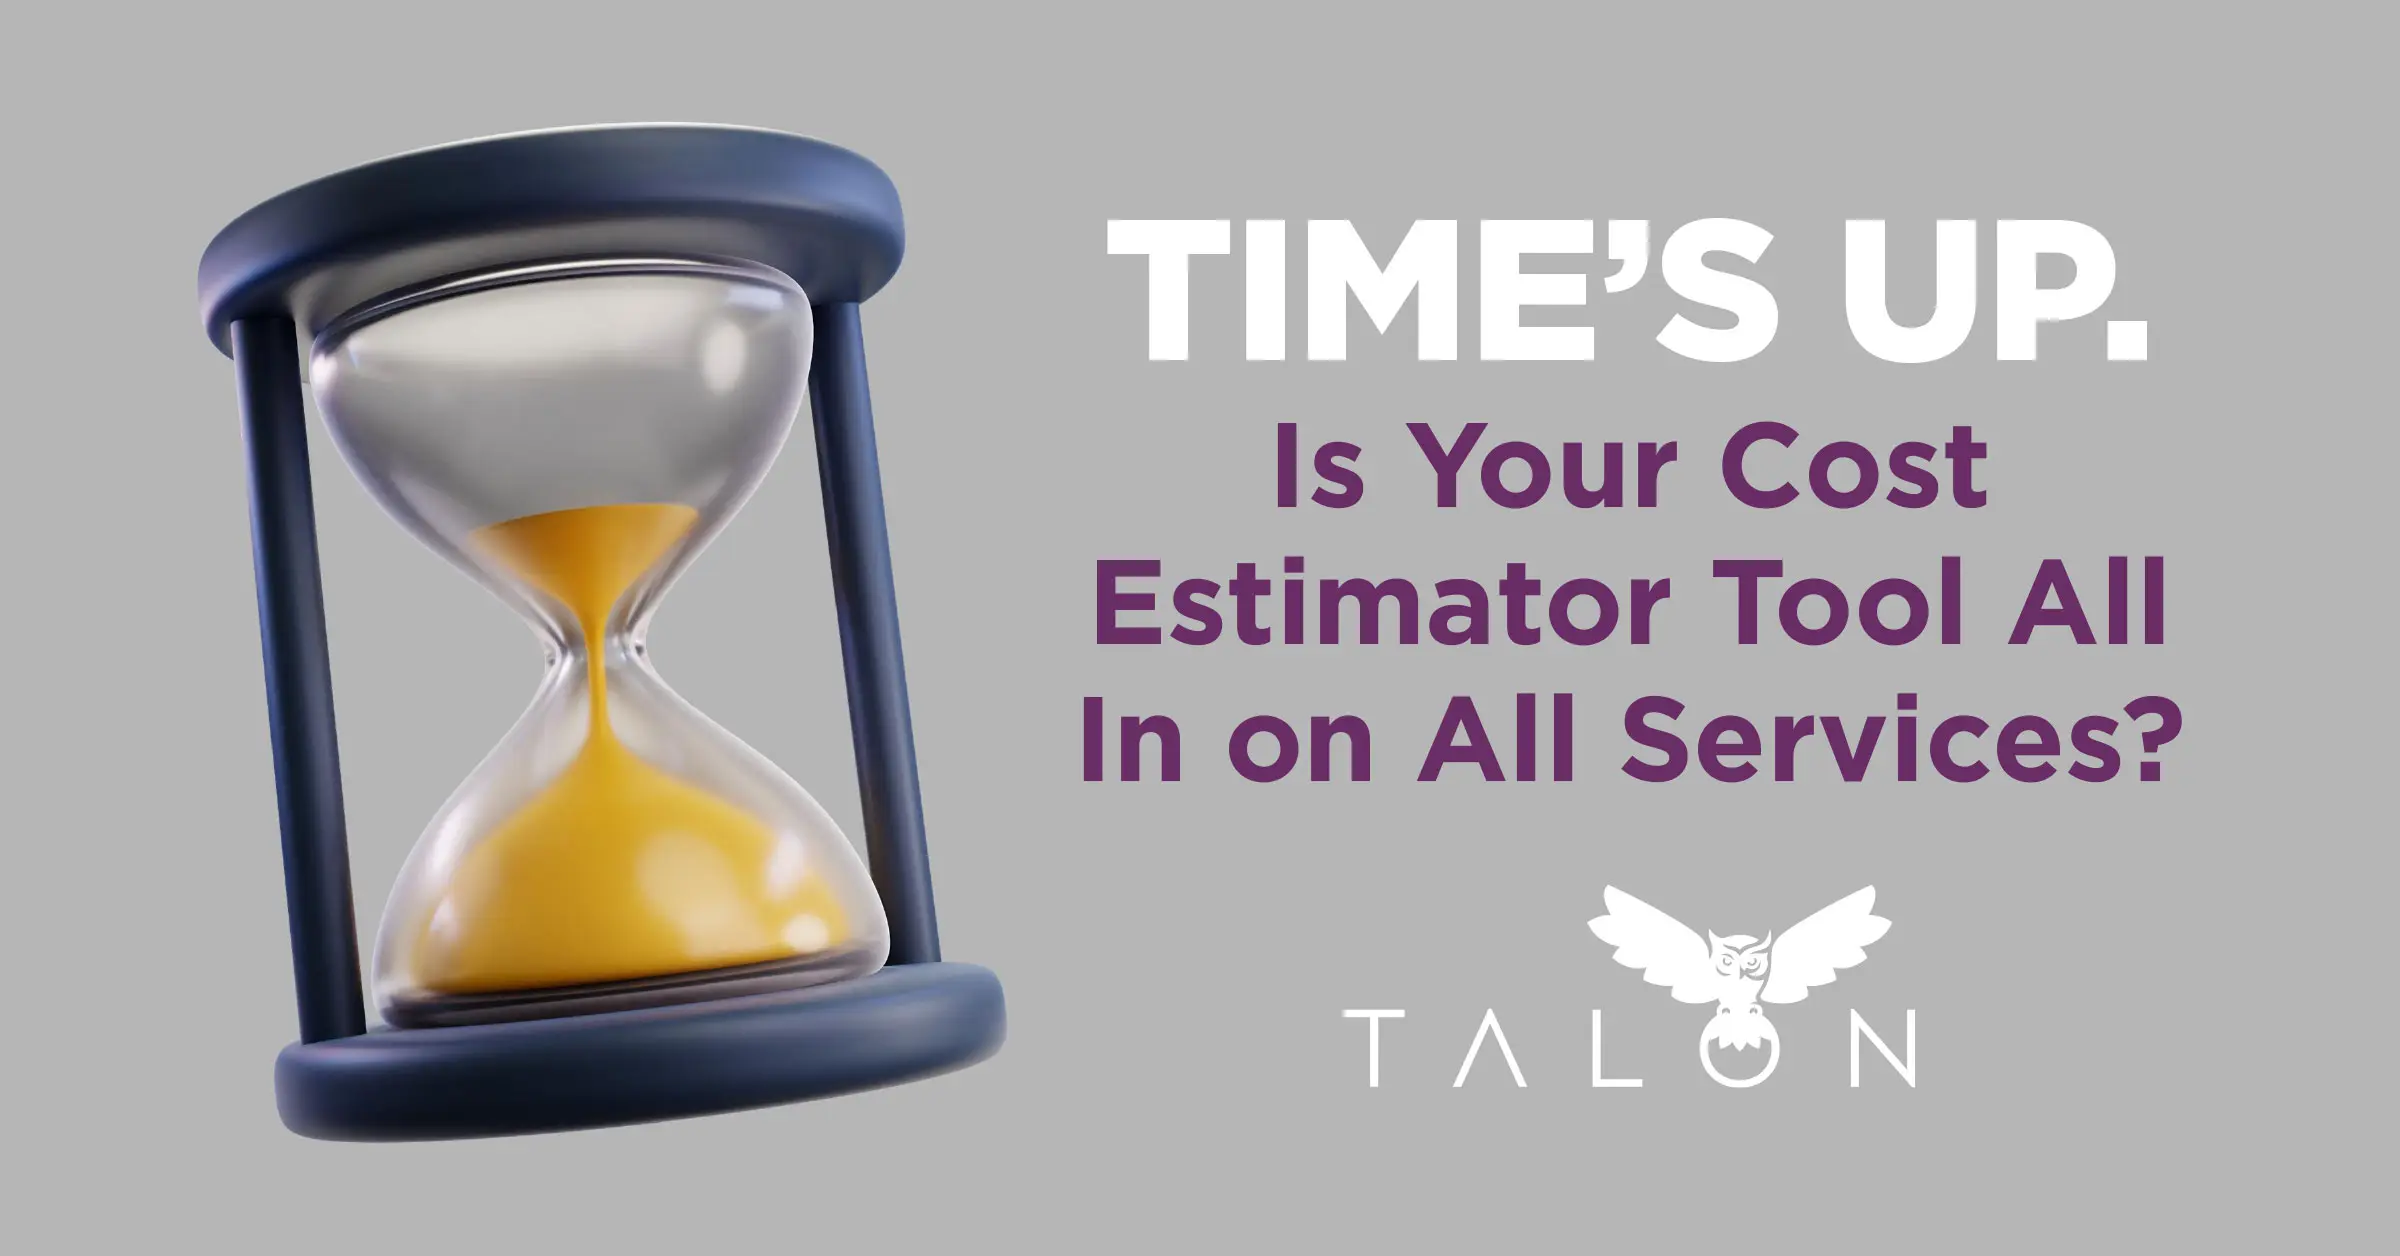 Times up. is your cost estimator tool all in on all services